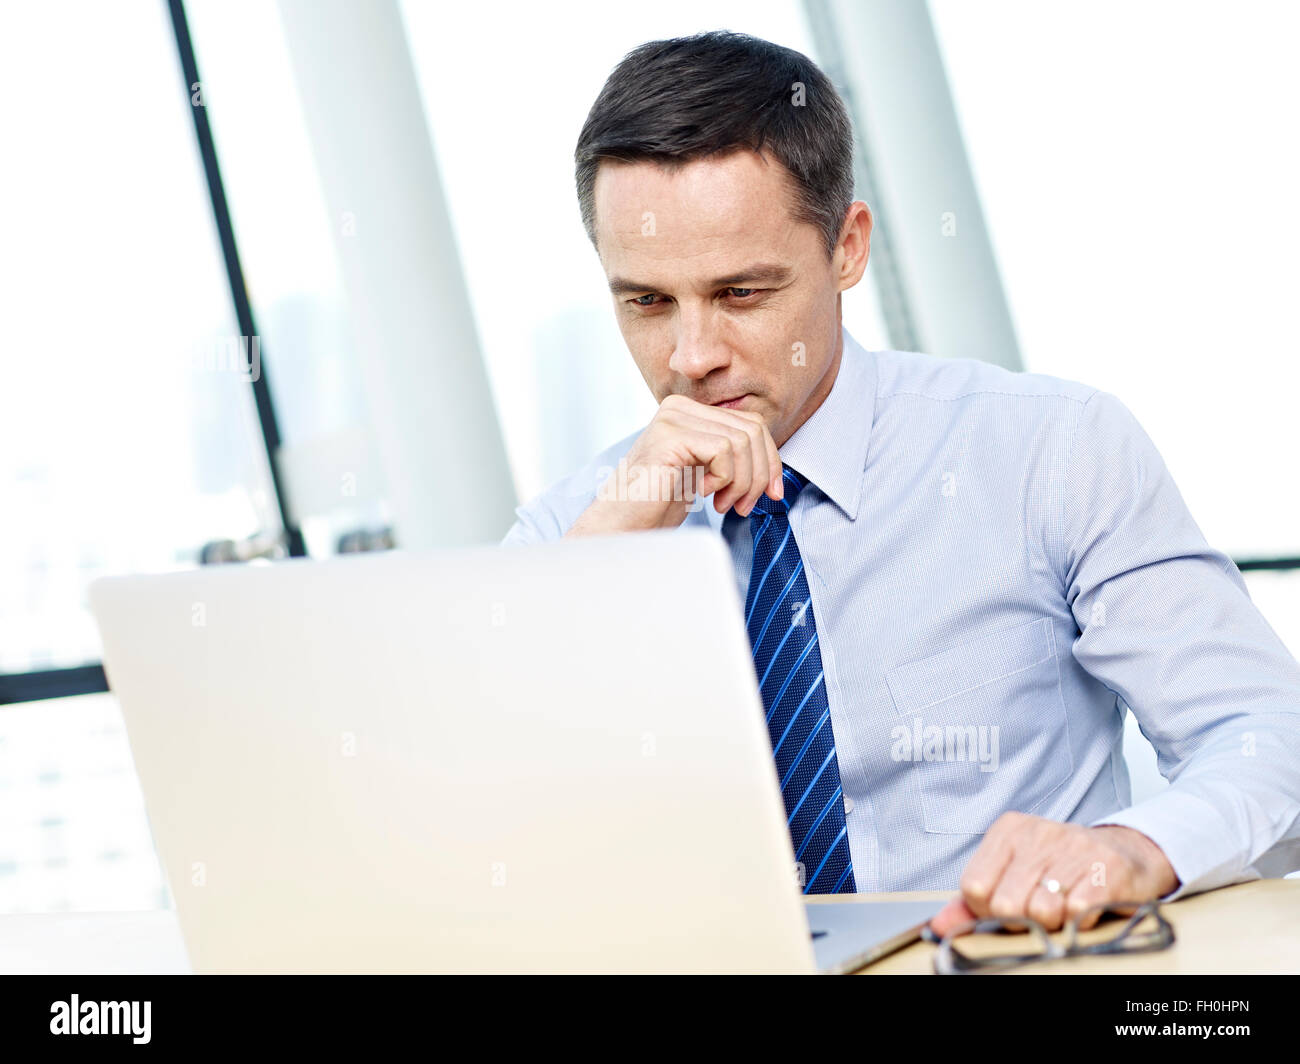 corporate person working in office on laptop computer Stock Photo